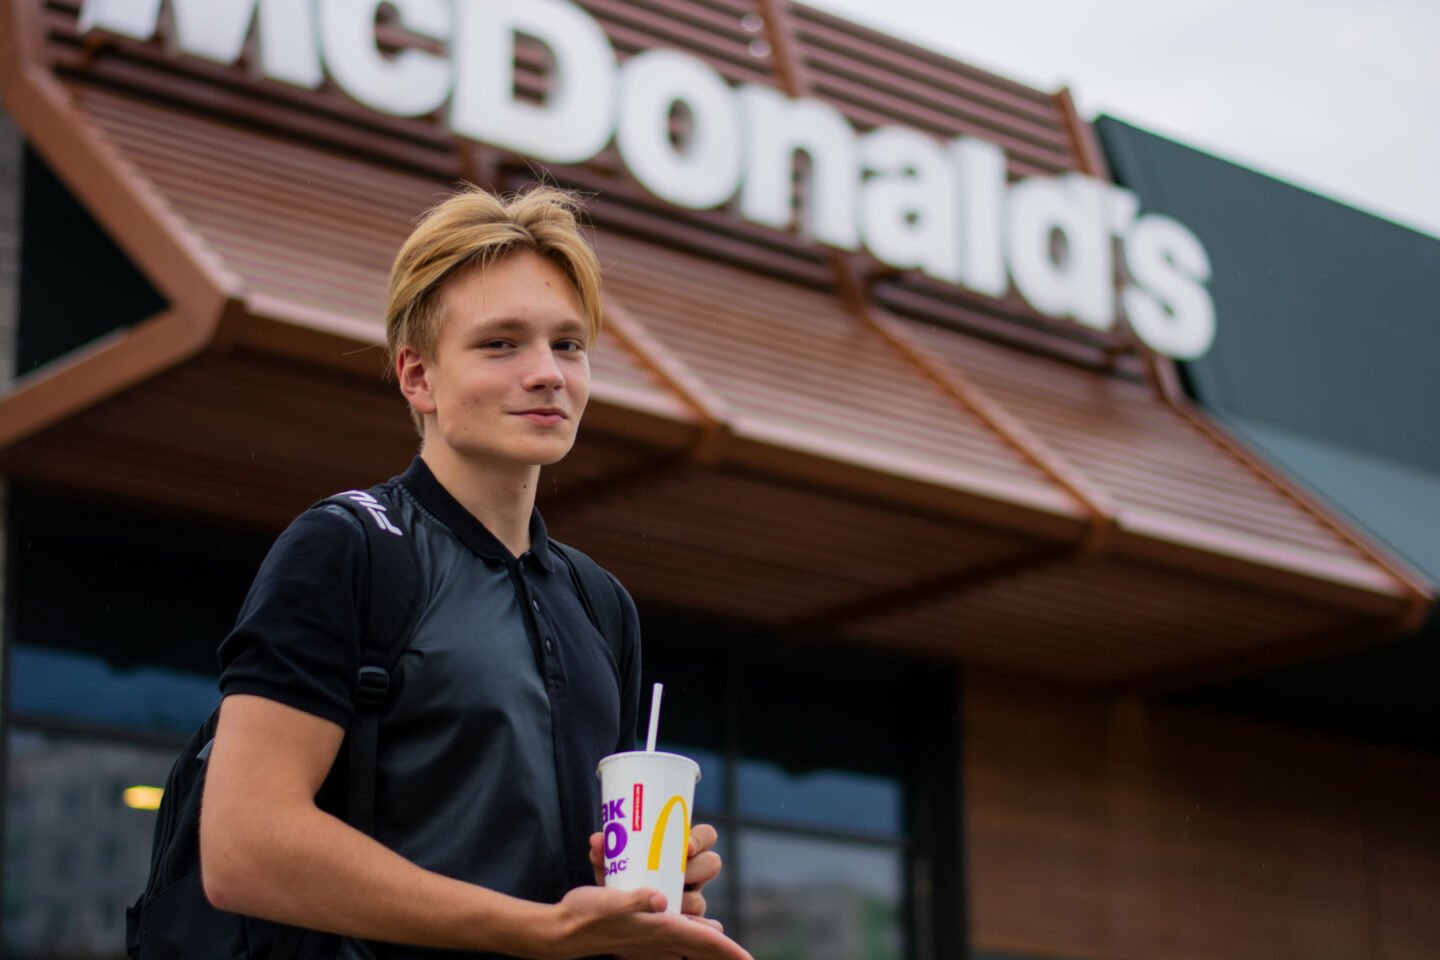 blond person standing in front of mcdonalds